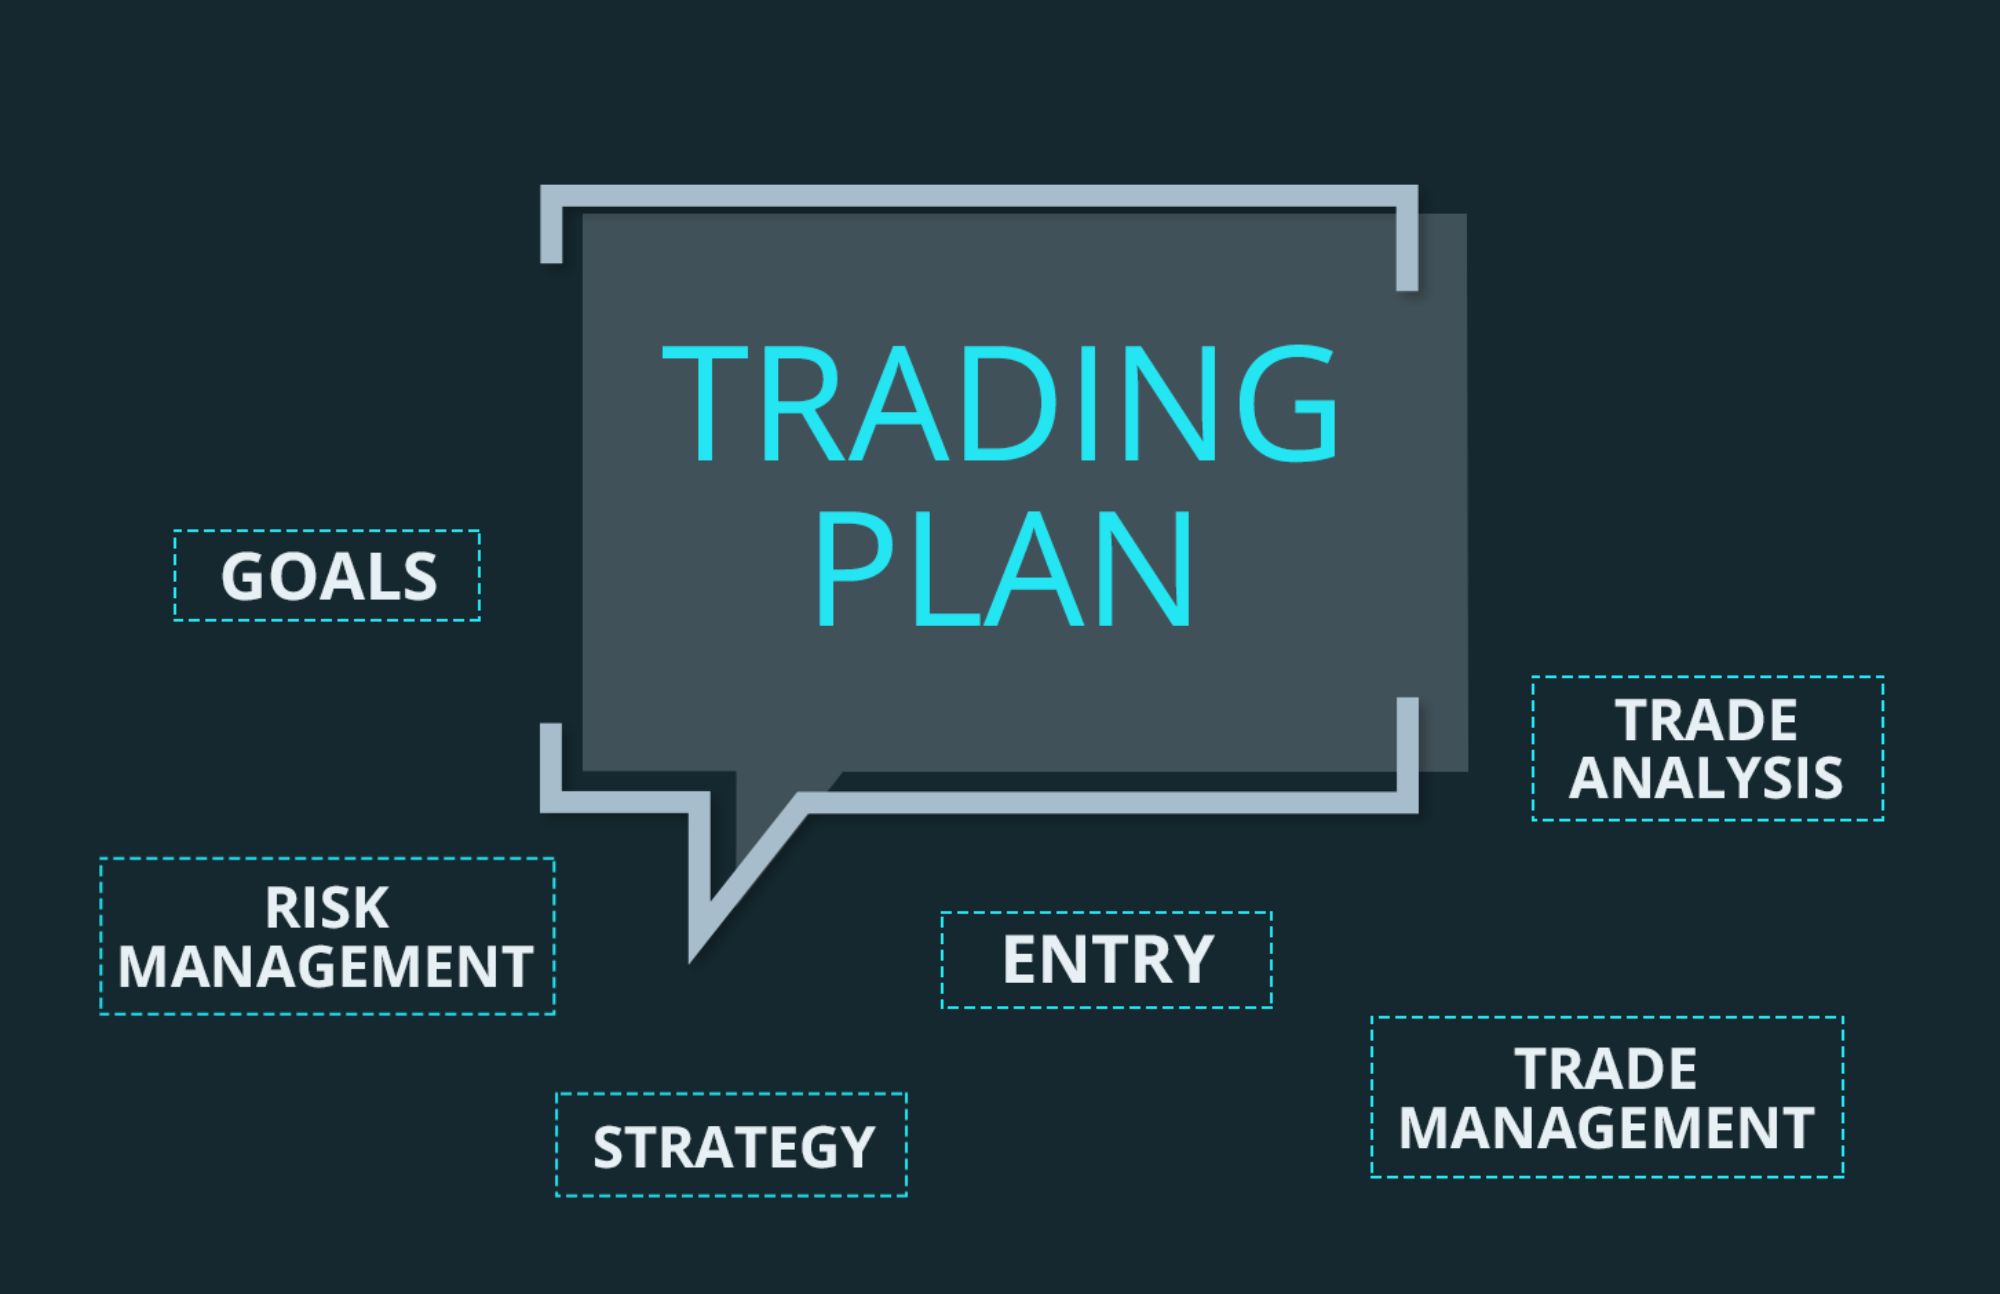 The phrase "Trading Plan" appears in emoji chats, as do some of the things that should be included in the plan